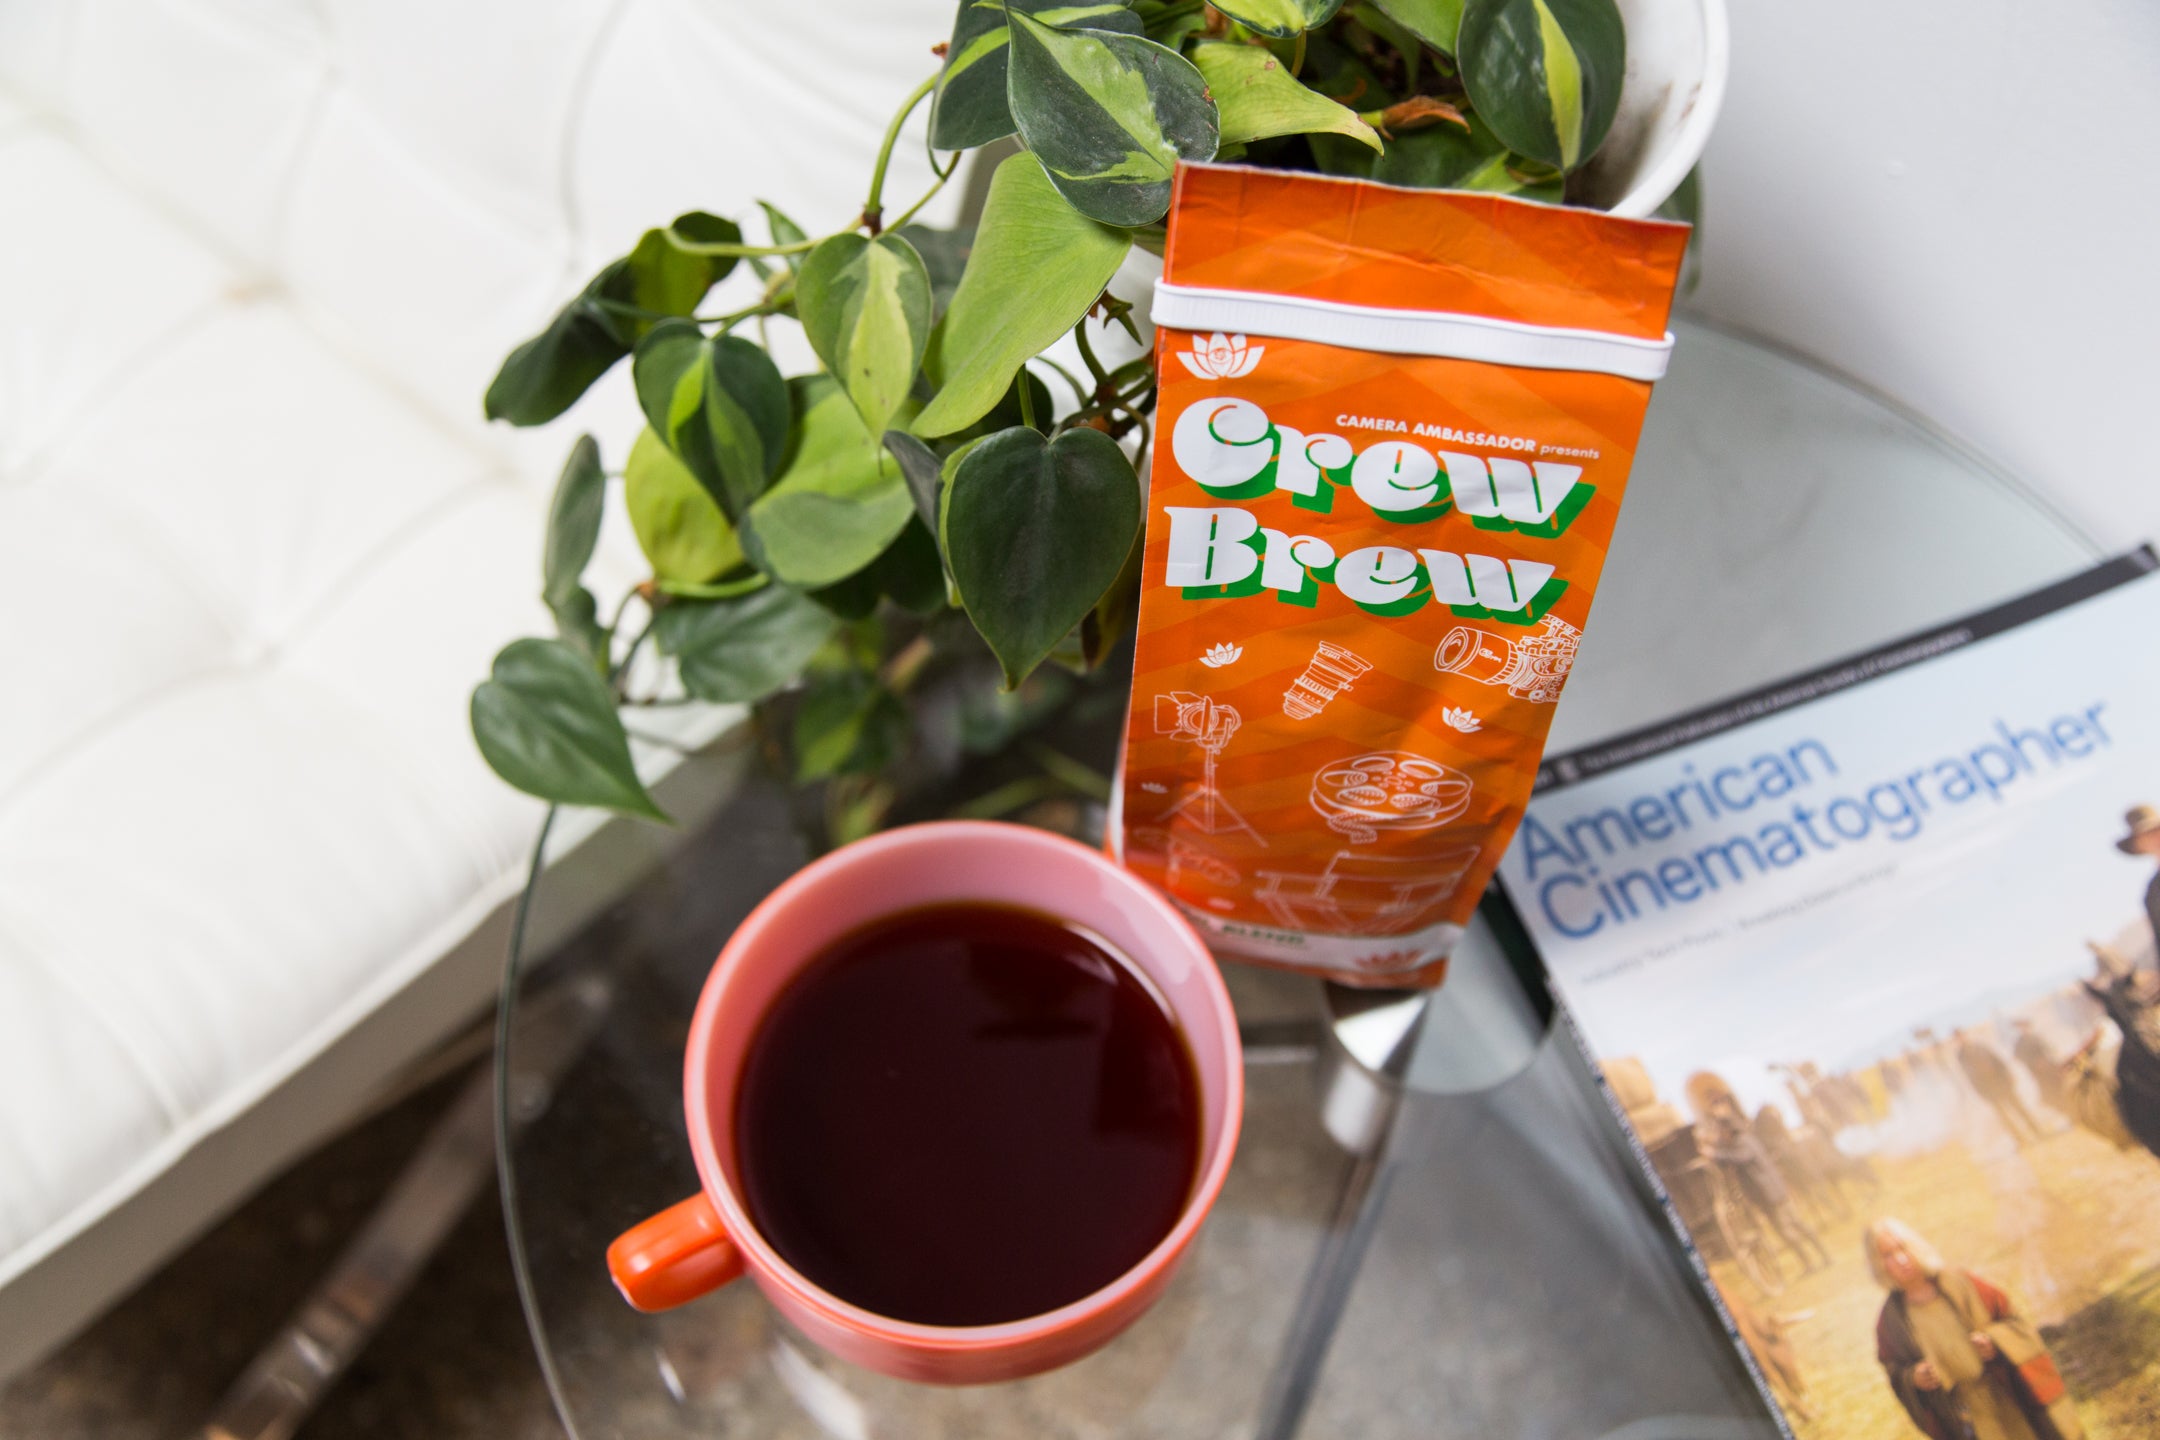 lifestyle photo of crew brew on a coffee table, next to a plant and a magazine "American Cinematographers"